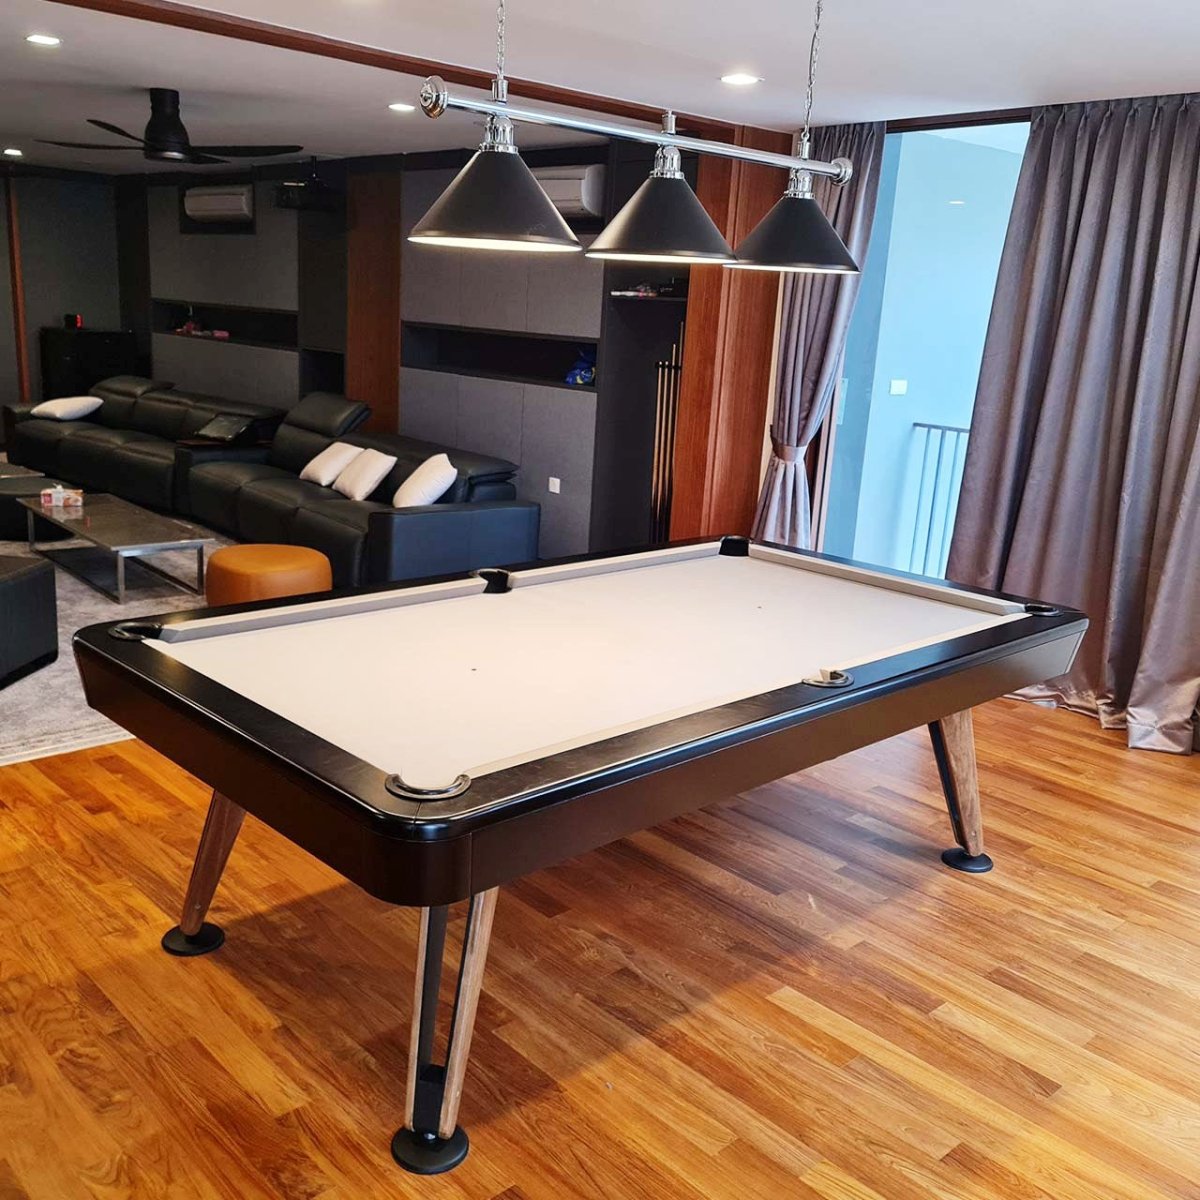 Tribeca Pool Table - Centric Billiard | Hong Kong's Premier Pool Table and Game Tables Retailer